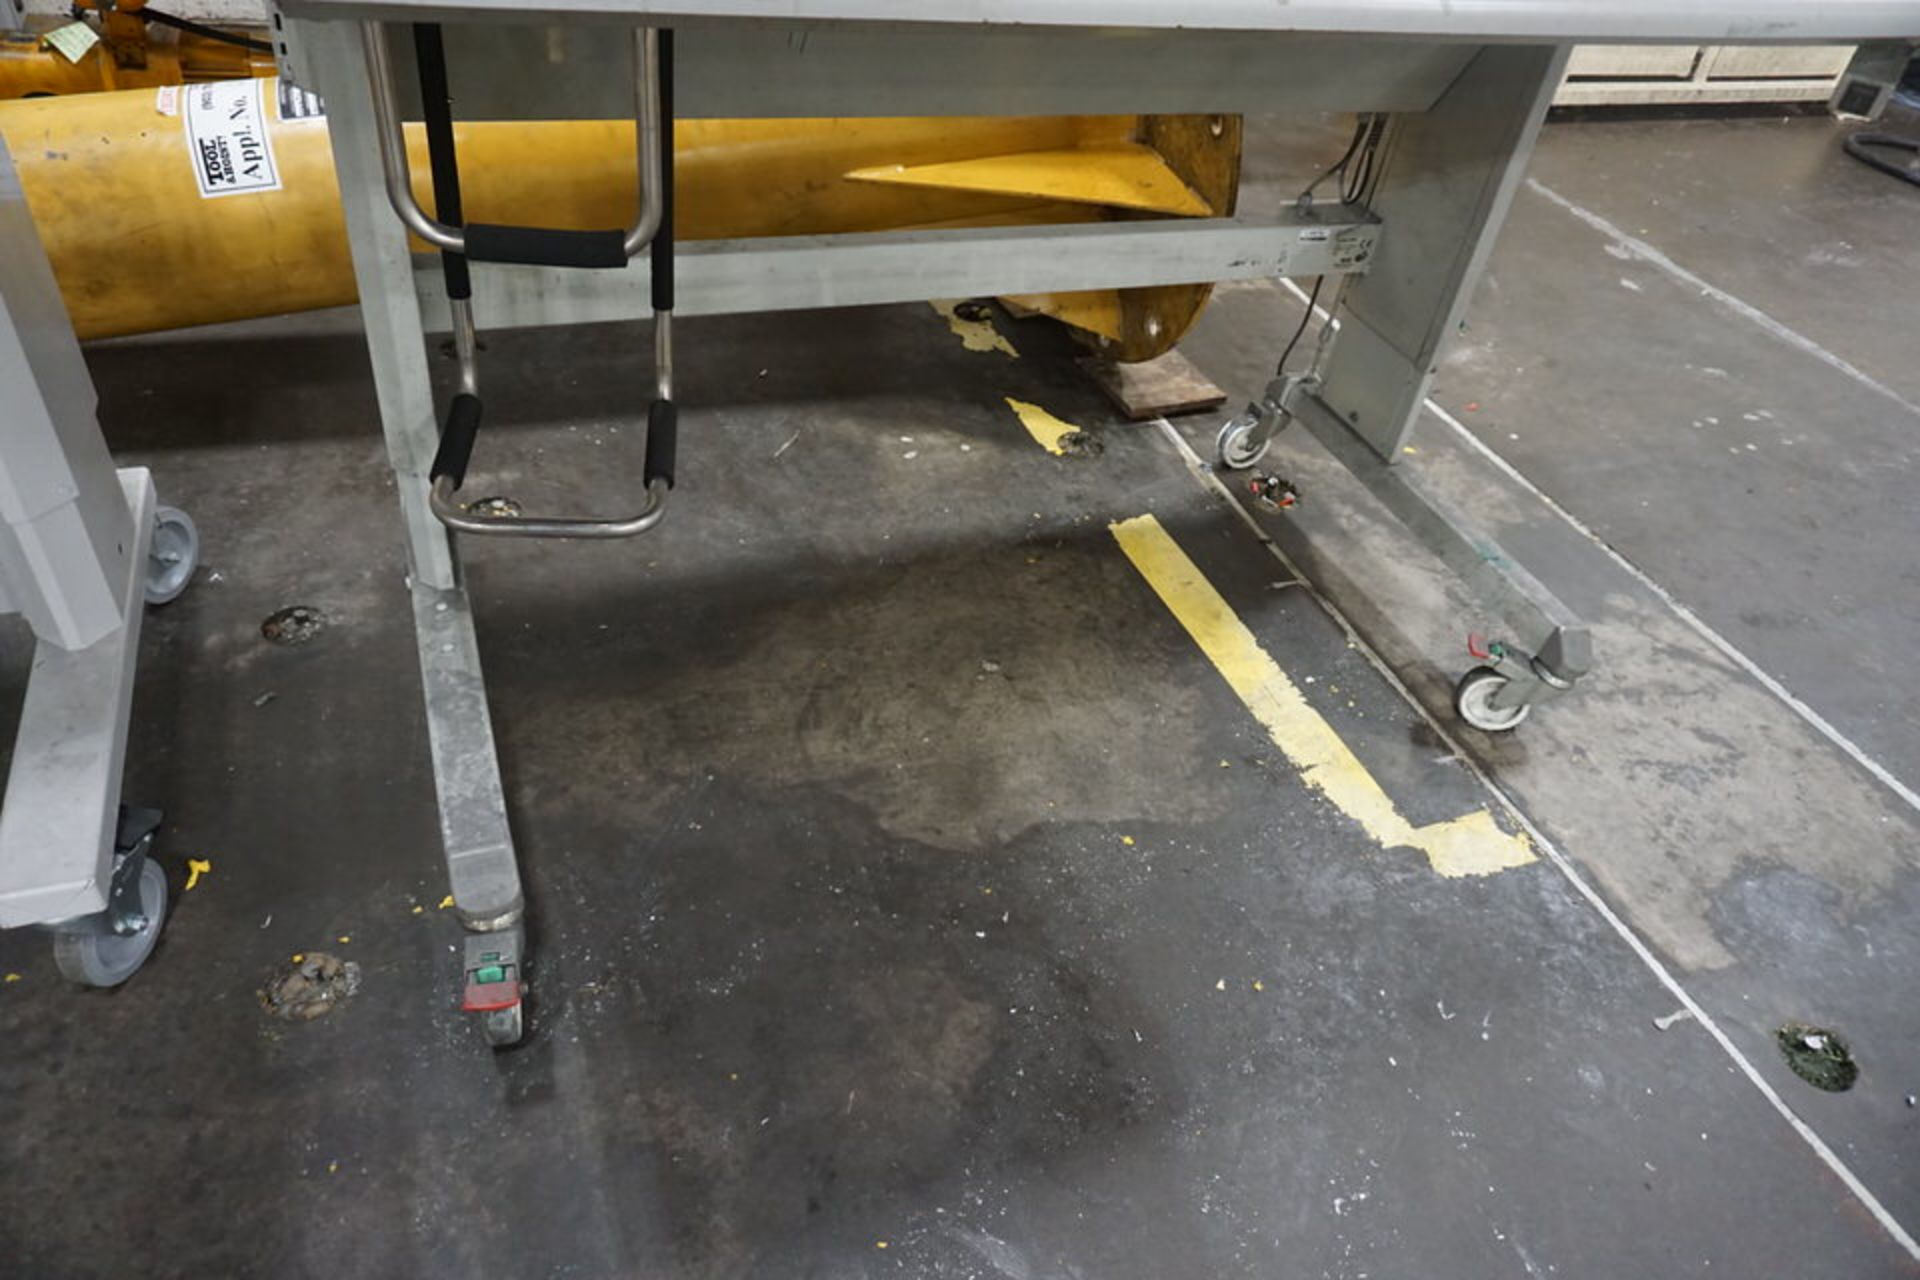 (2) Elec Lighted Adj Ht Work Benches, 30" x 60" on Casters - Image 4 of 5